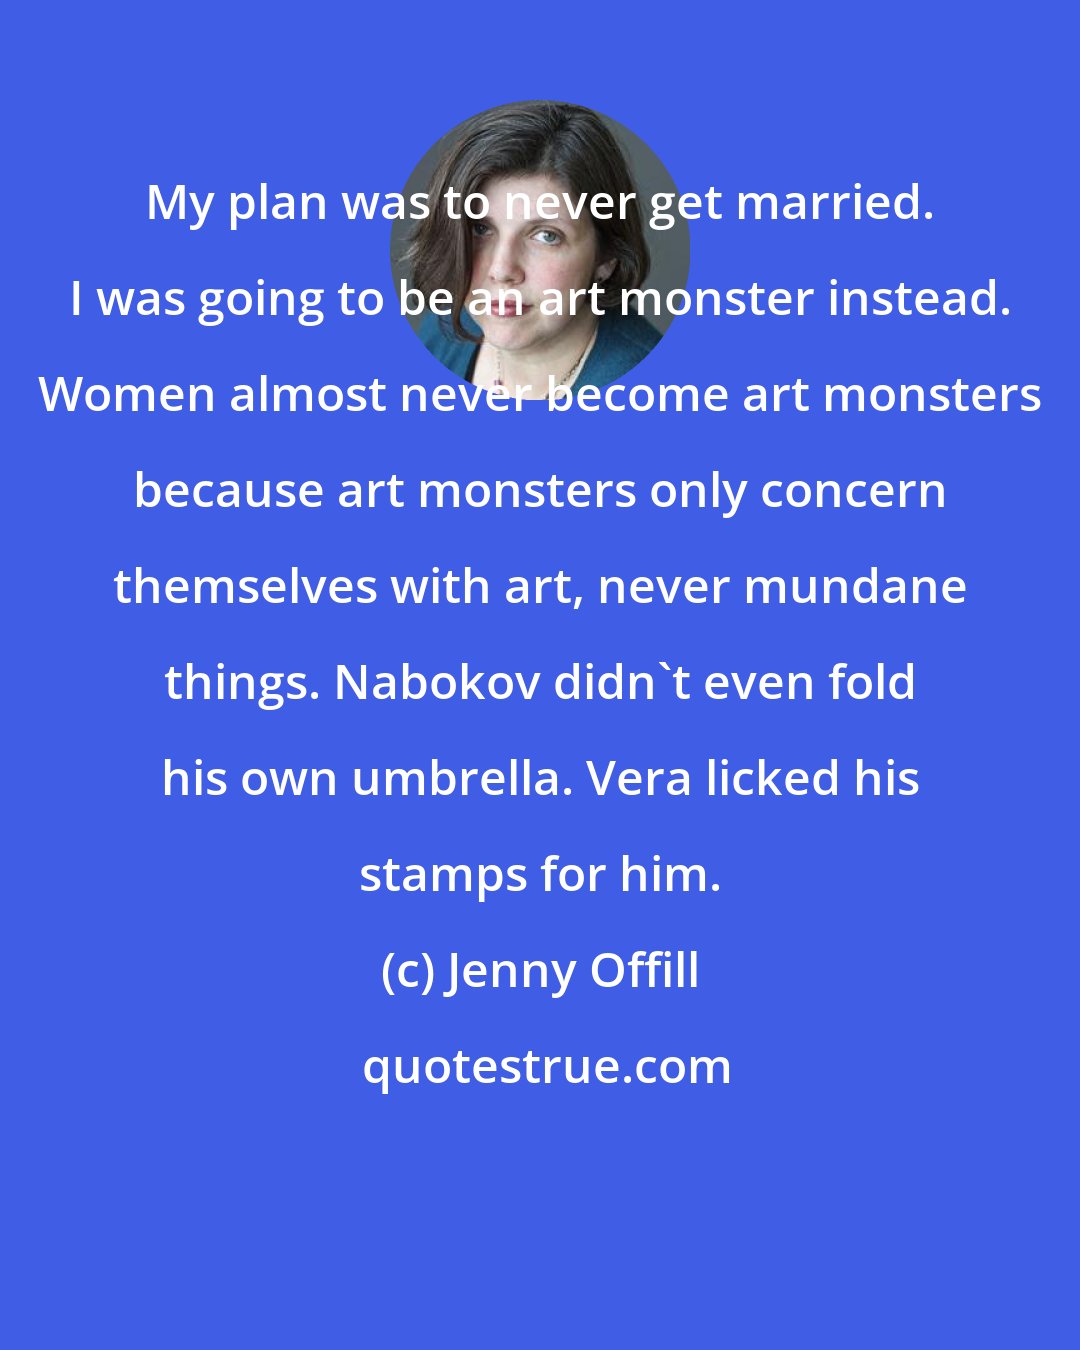 Jenny Offill: My plan was to never get married. I was going to be an art monster instead. Women almost never become art monsters because art monsters only concern themselves with art, never mundane things. Nabokov didn't even fold his own umbrella. Vera licked his stamps for him.